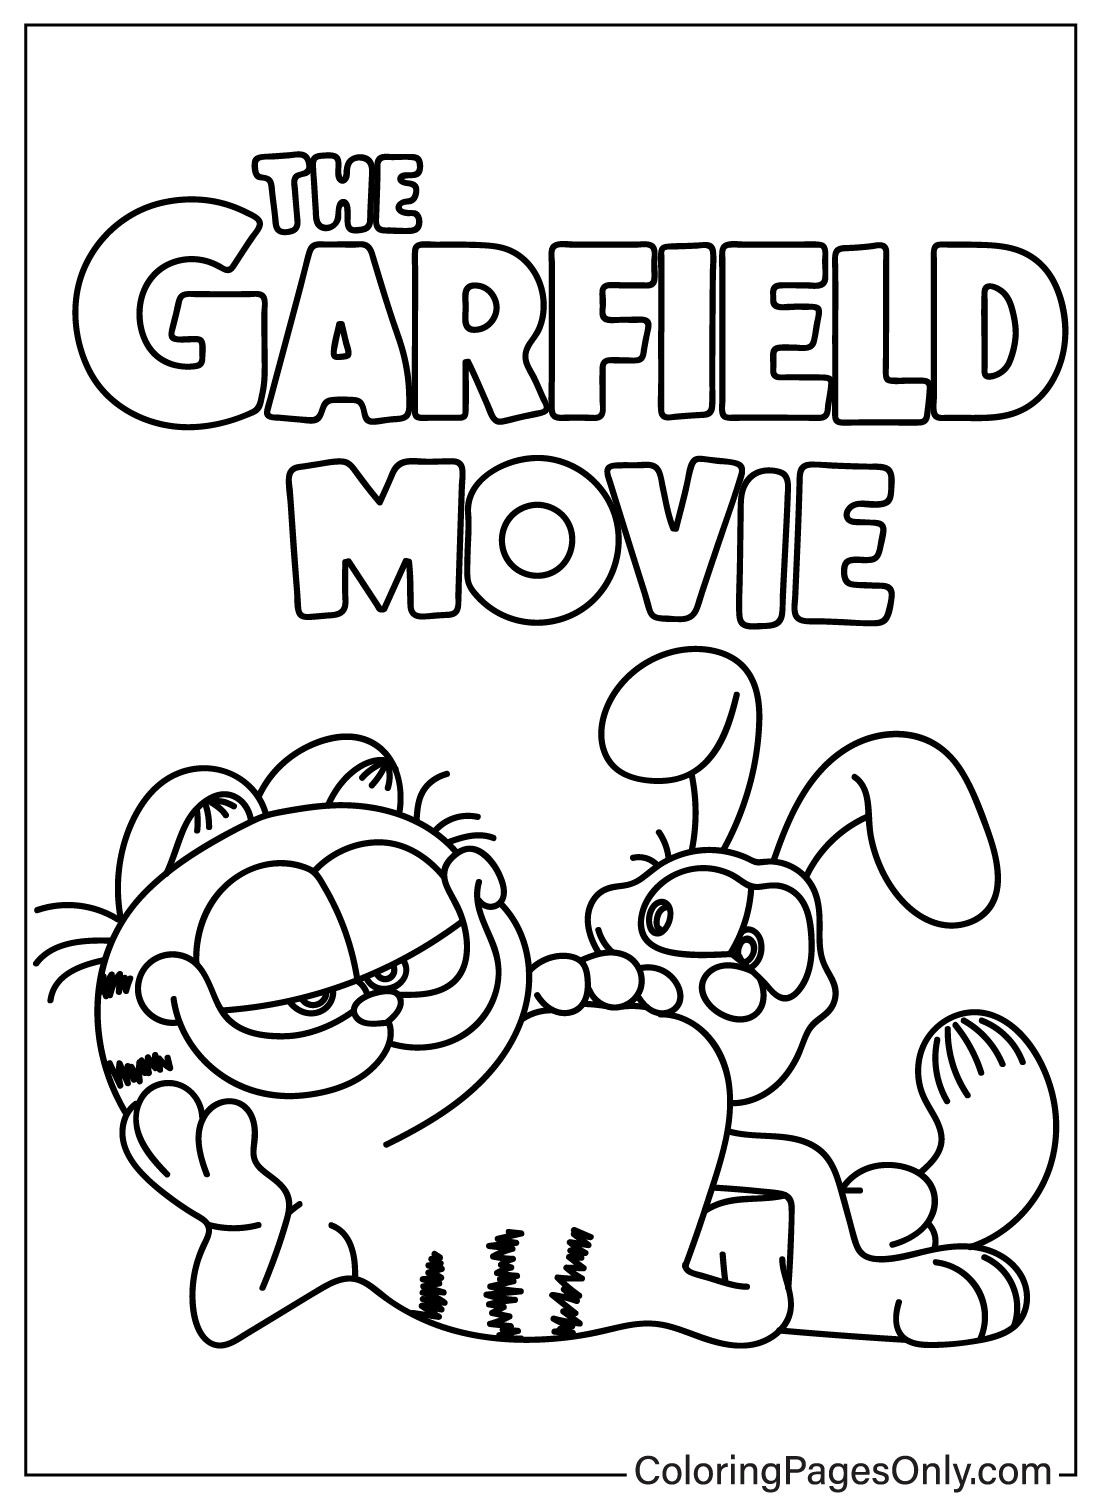 Garfield and Odie Coloring Page from Garfield